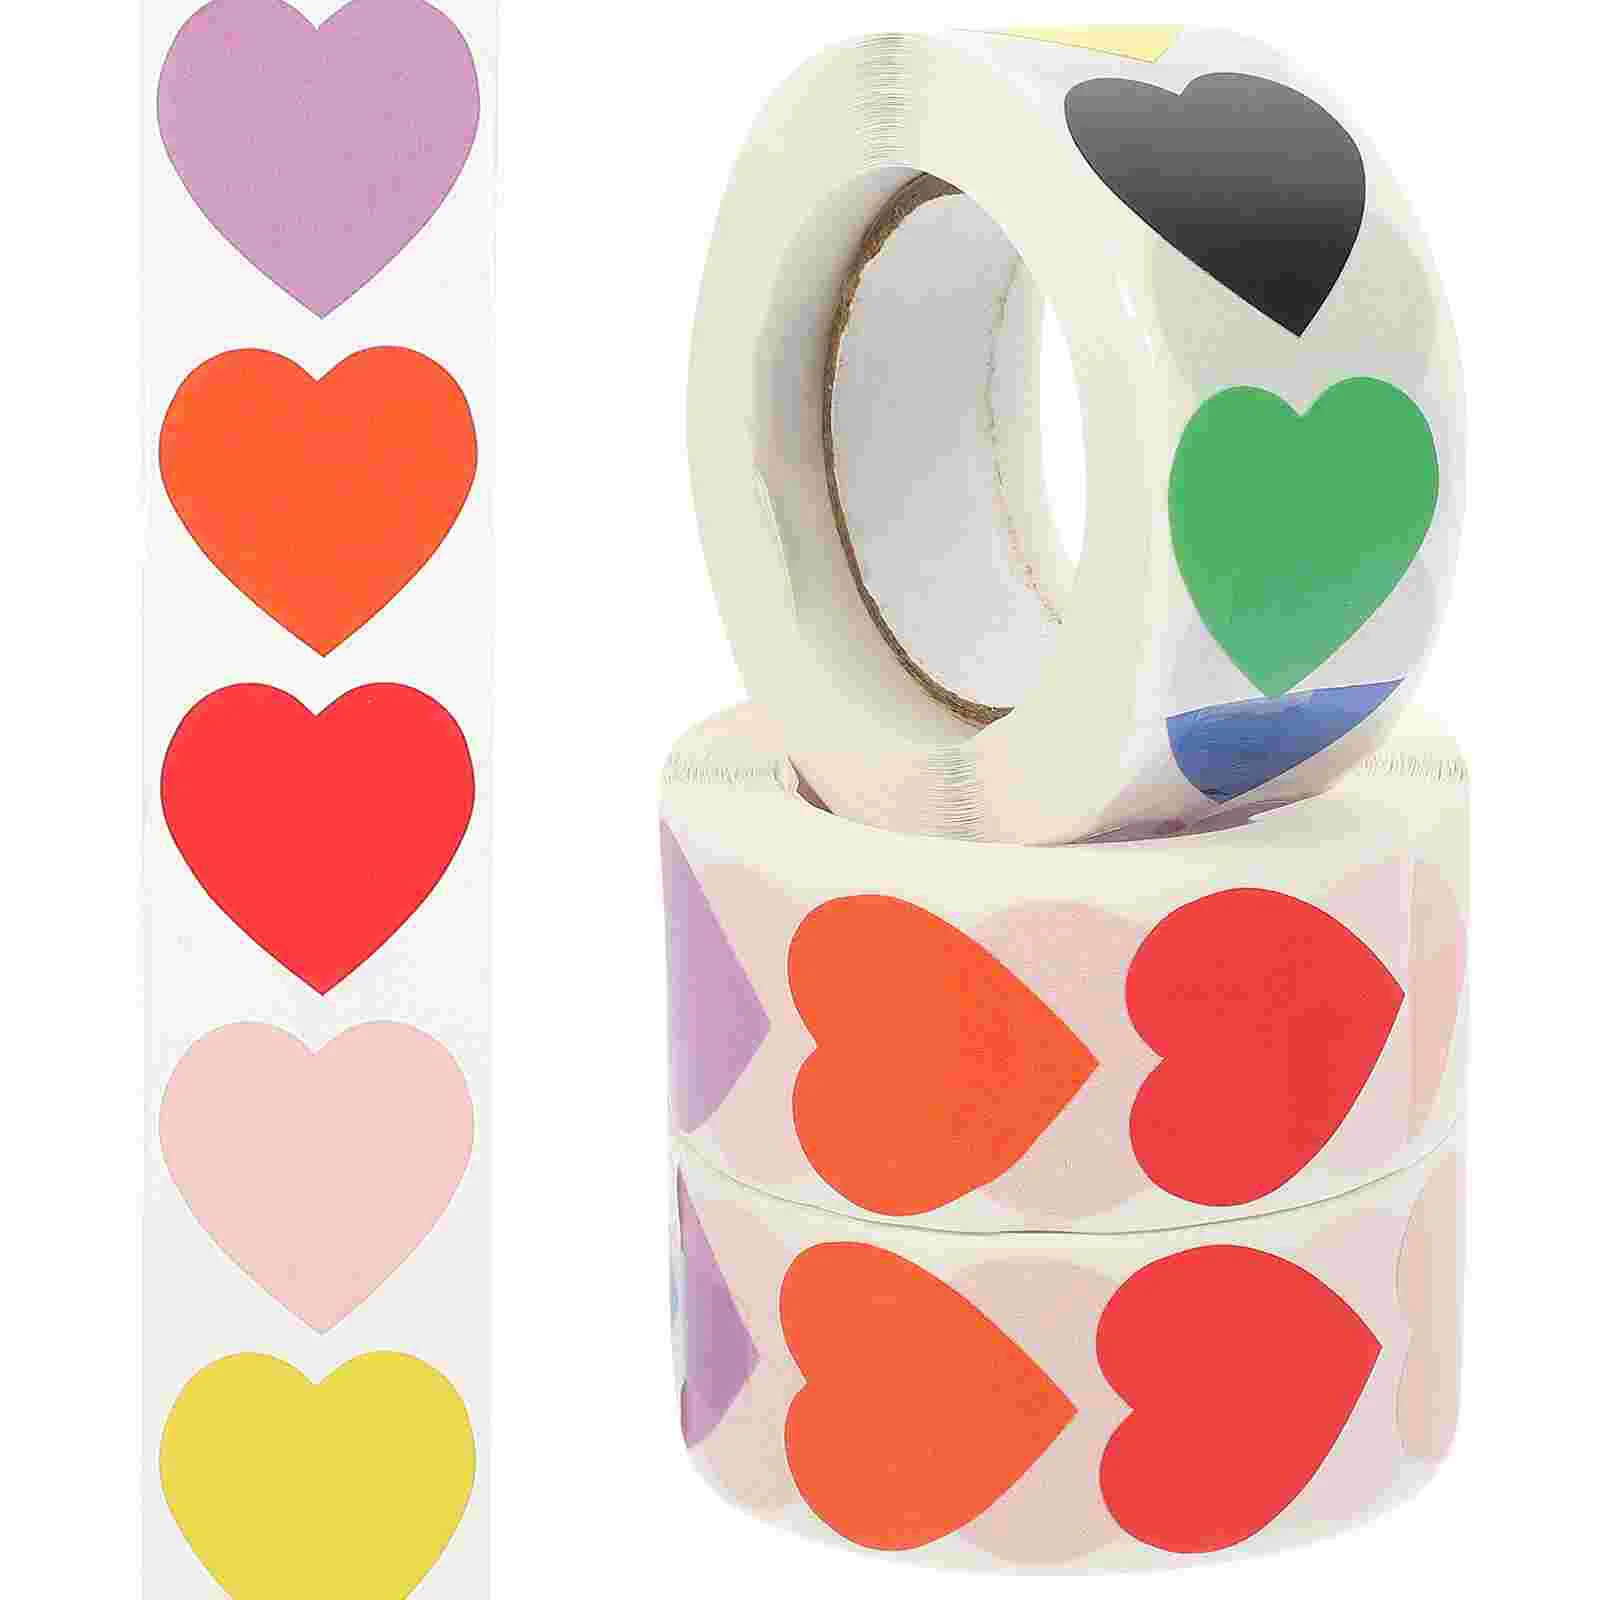 

Stickers Heart Sticker Gift Seal Sealing Blank Funnylabel Scrapbook Envelope Wall Rolls Colored Candy Roll Shaped Packing Photo